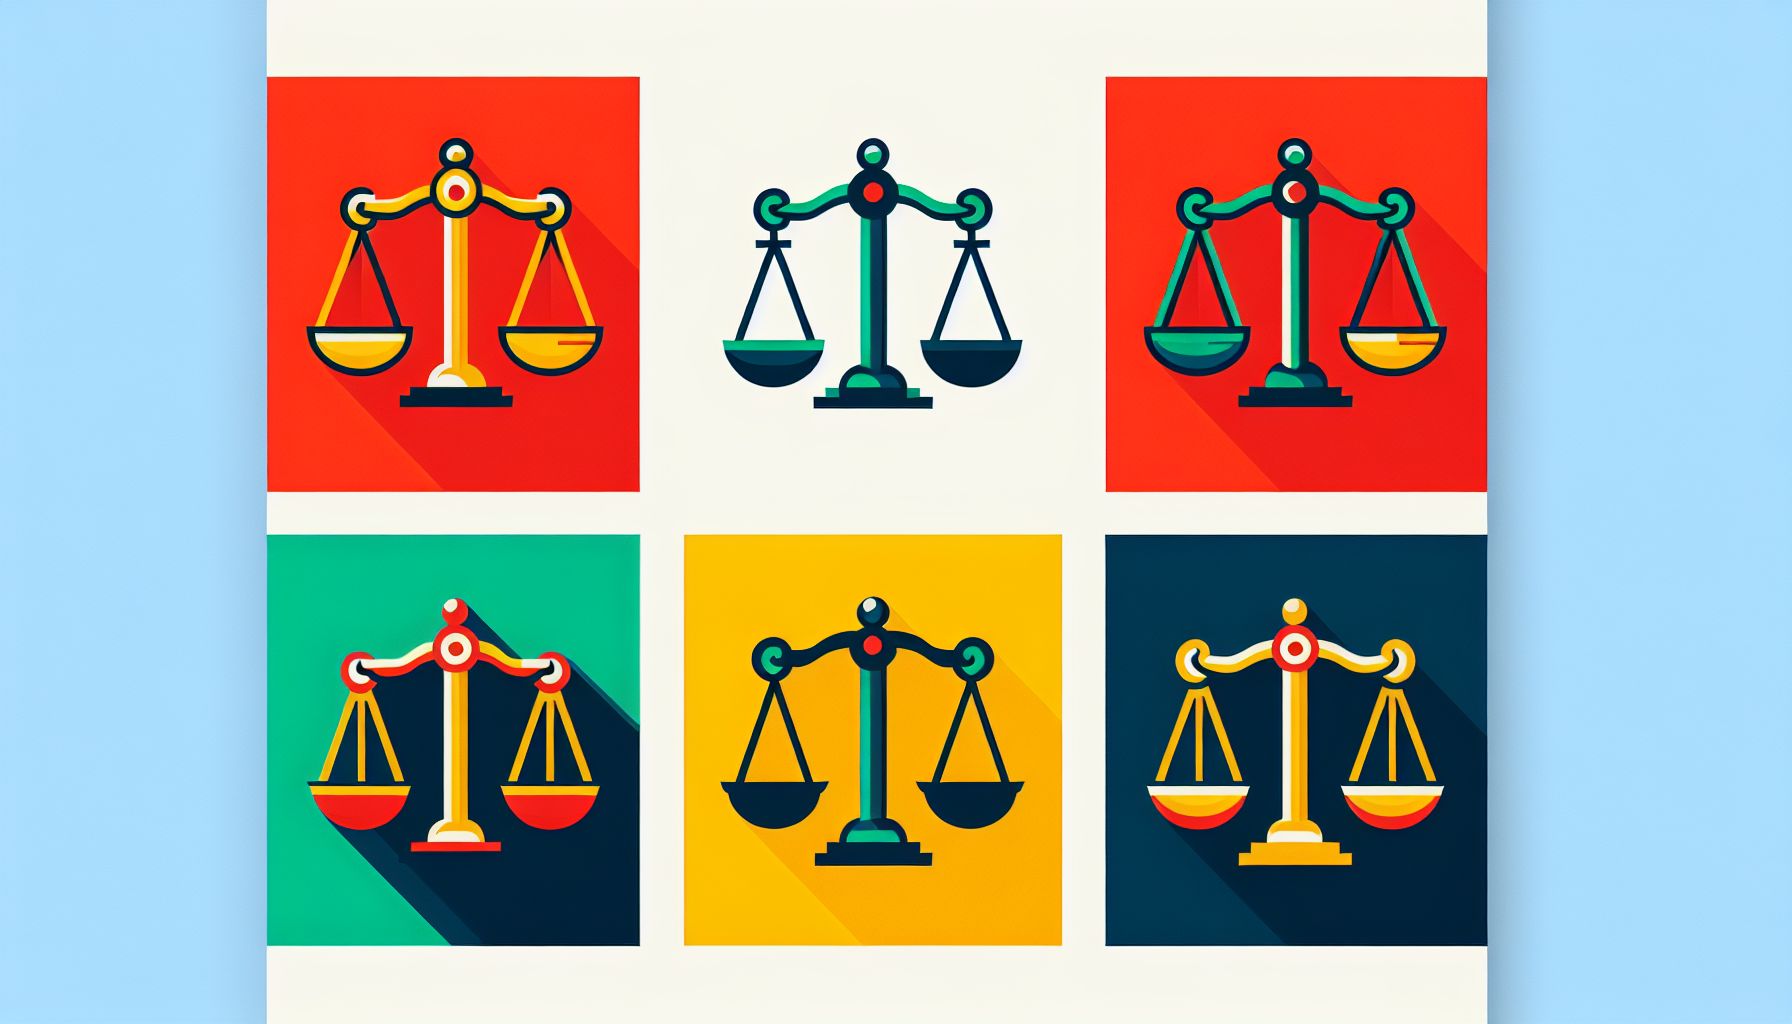 Scales in flat illustration style and white background, red #f47574, green #88c7a8, yellow #fcc44b, and blue #645bc8 colors.